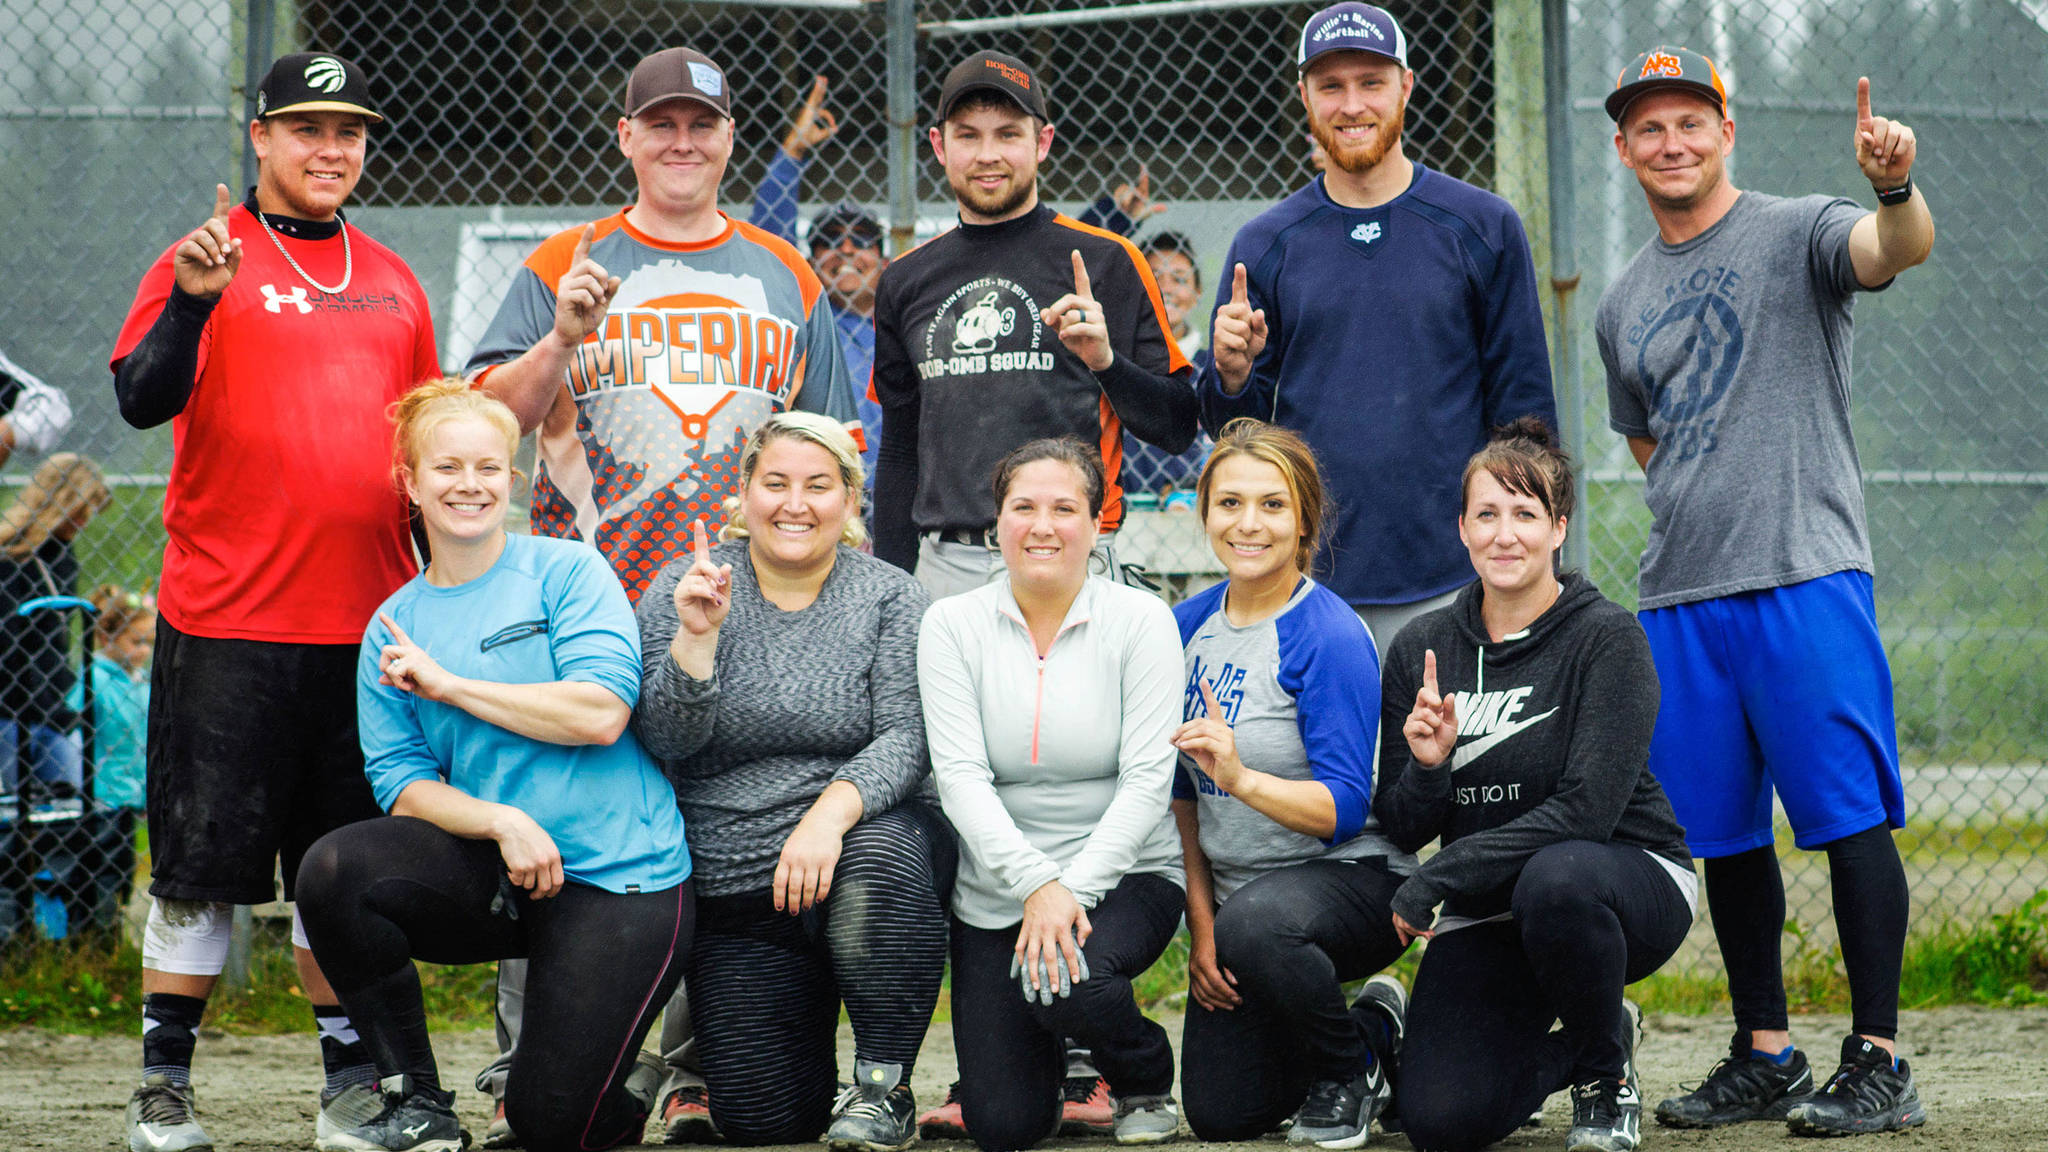 The upper division winners of the 22nd Annual Coed Softball Benefit Tournament: BrokeBat Mountain. (Courtesy Photo | Katie Damien)